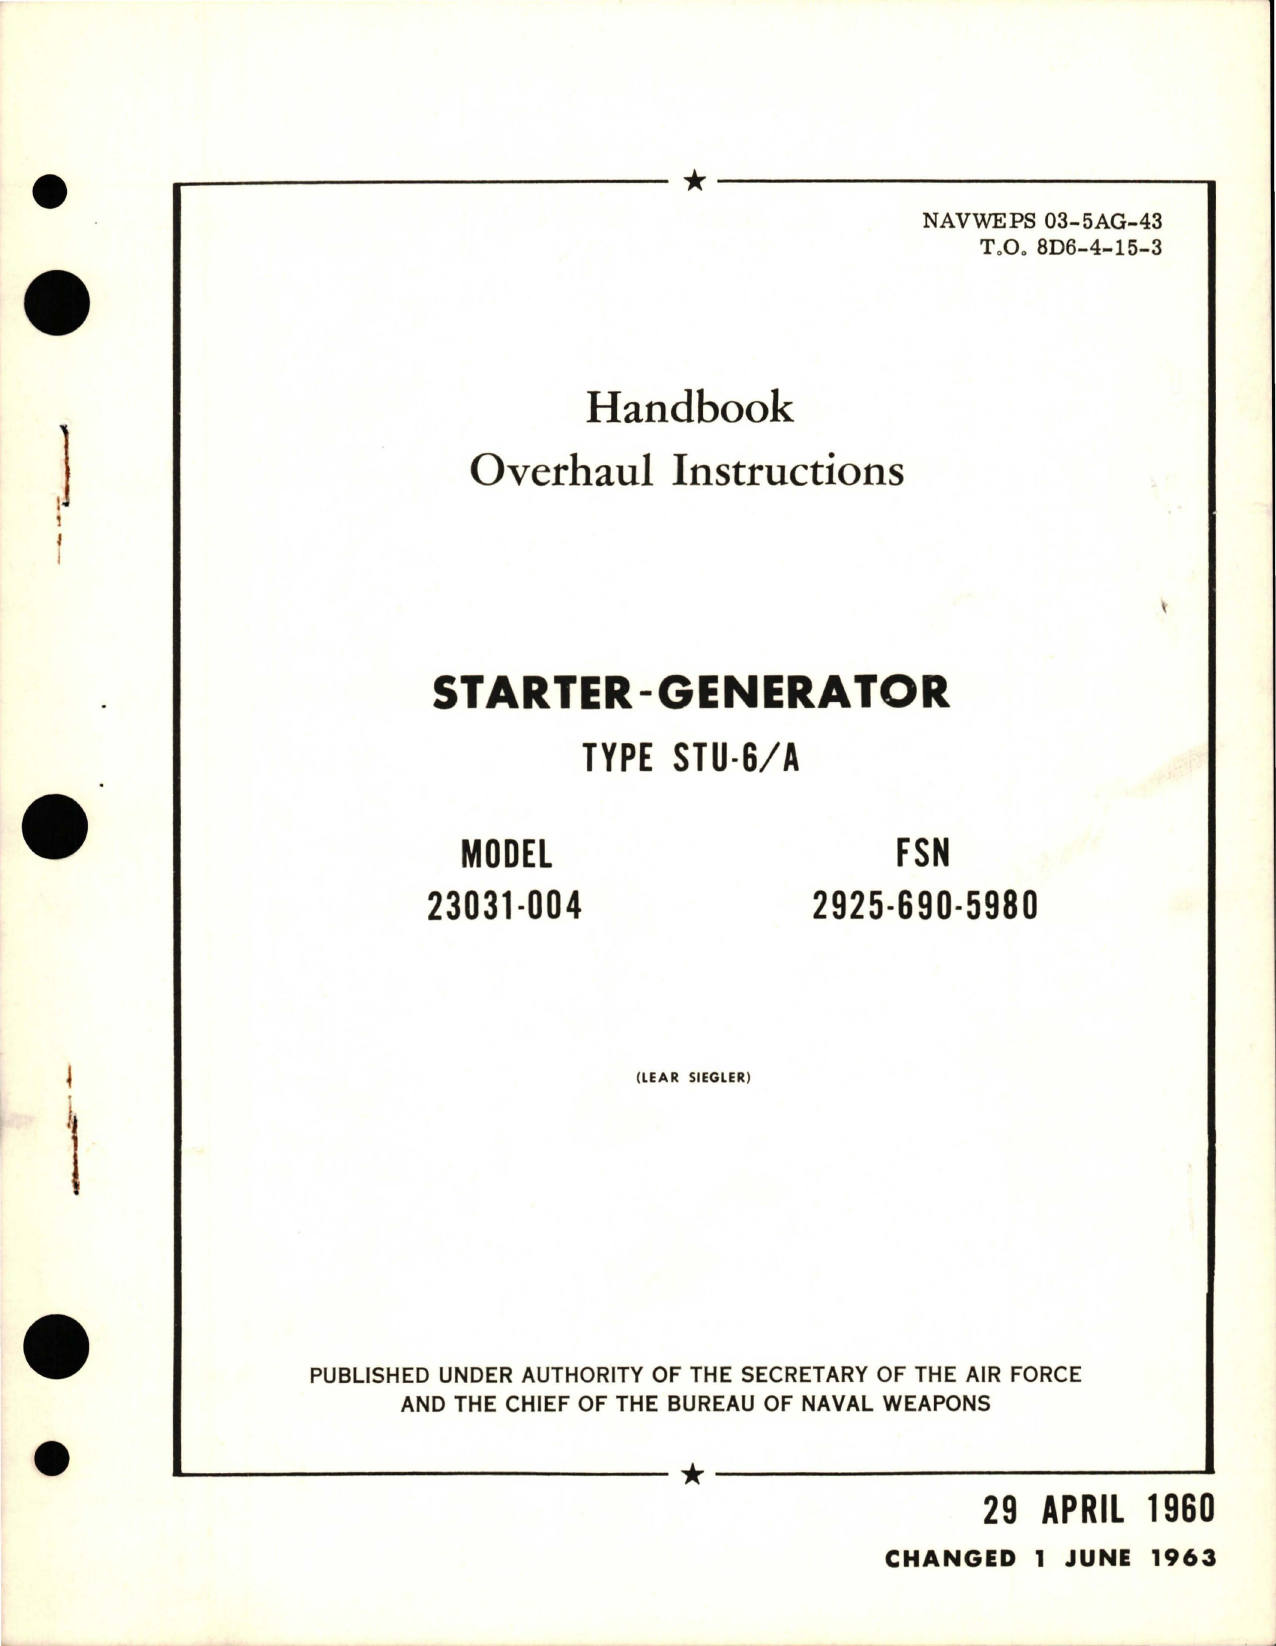 Sample page 1 from AirCorps Library document: Overhaul Instructions for Starter-Generator - Type STU-6 A - Model 23031-004